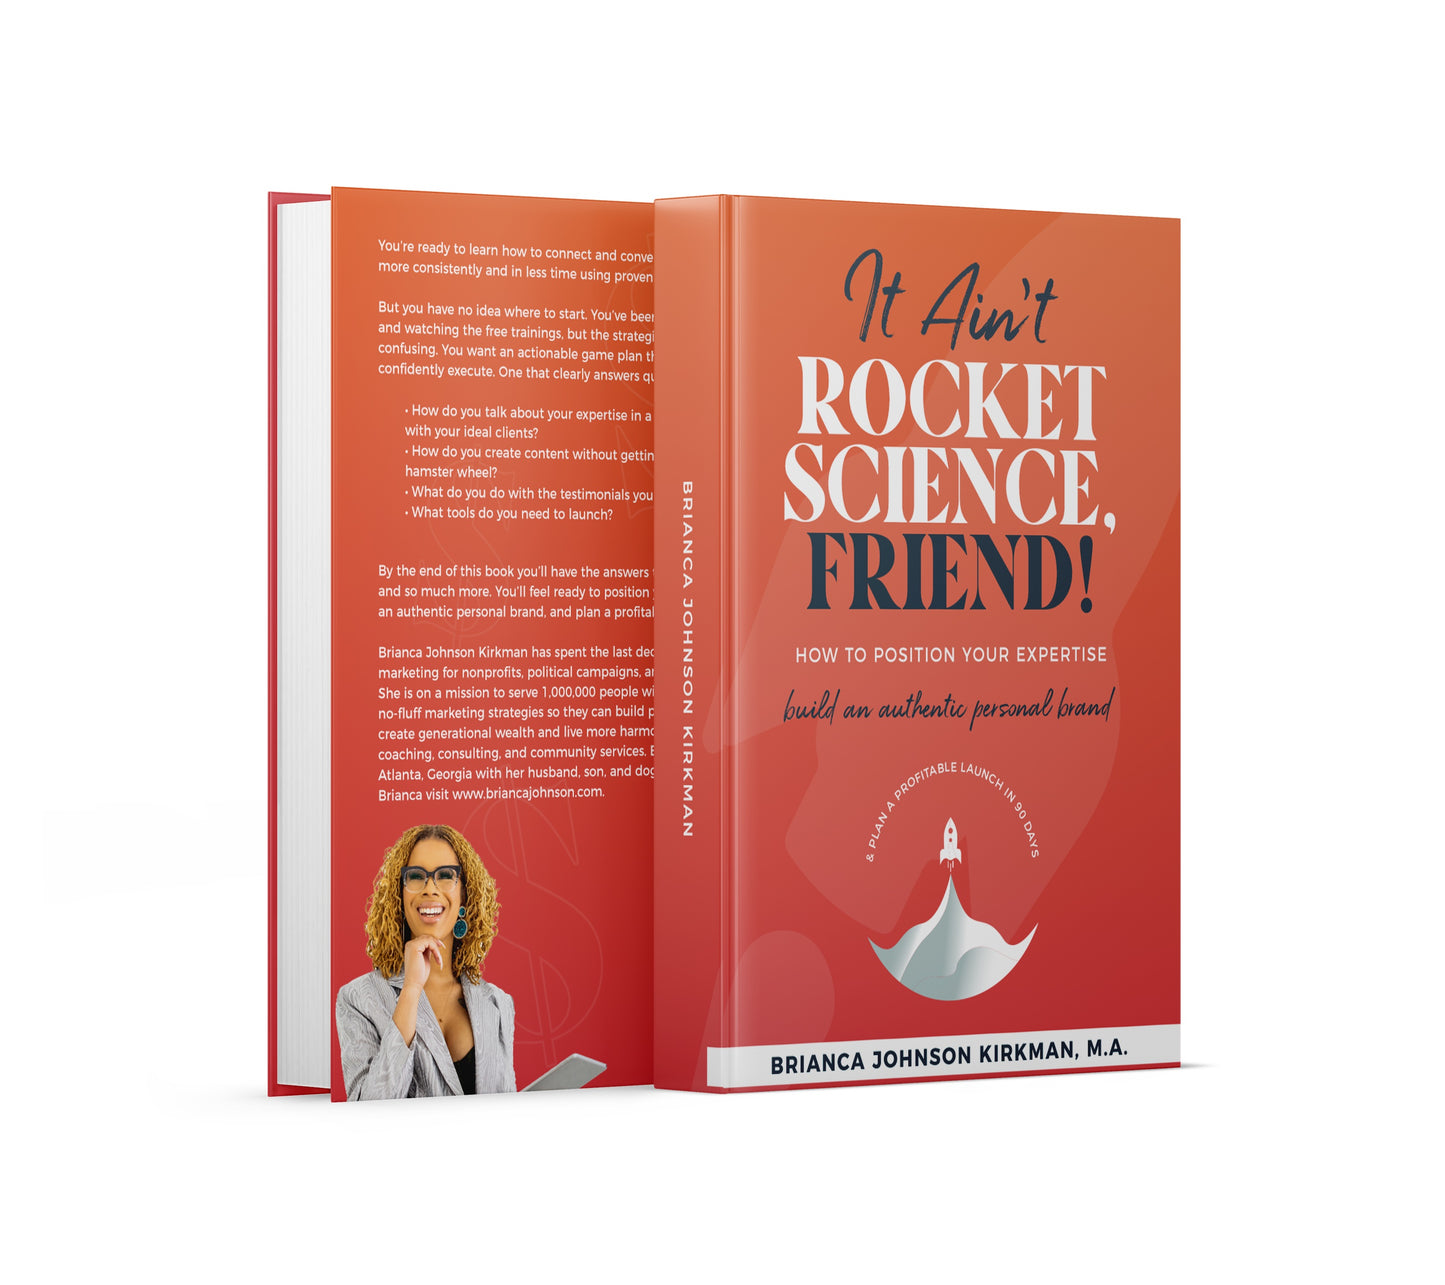 [E-Book] It Ain’t Rocket Science, Friend!: How to Position Your Expertise, Build An Authentic Personal Brand, and Plan a Profitable Launch in 90 Days.